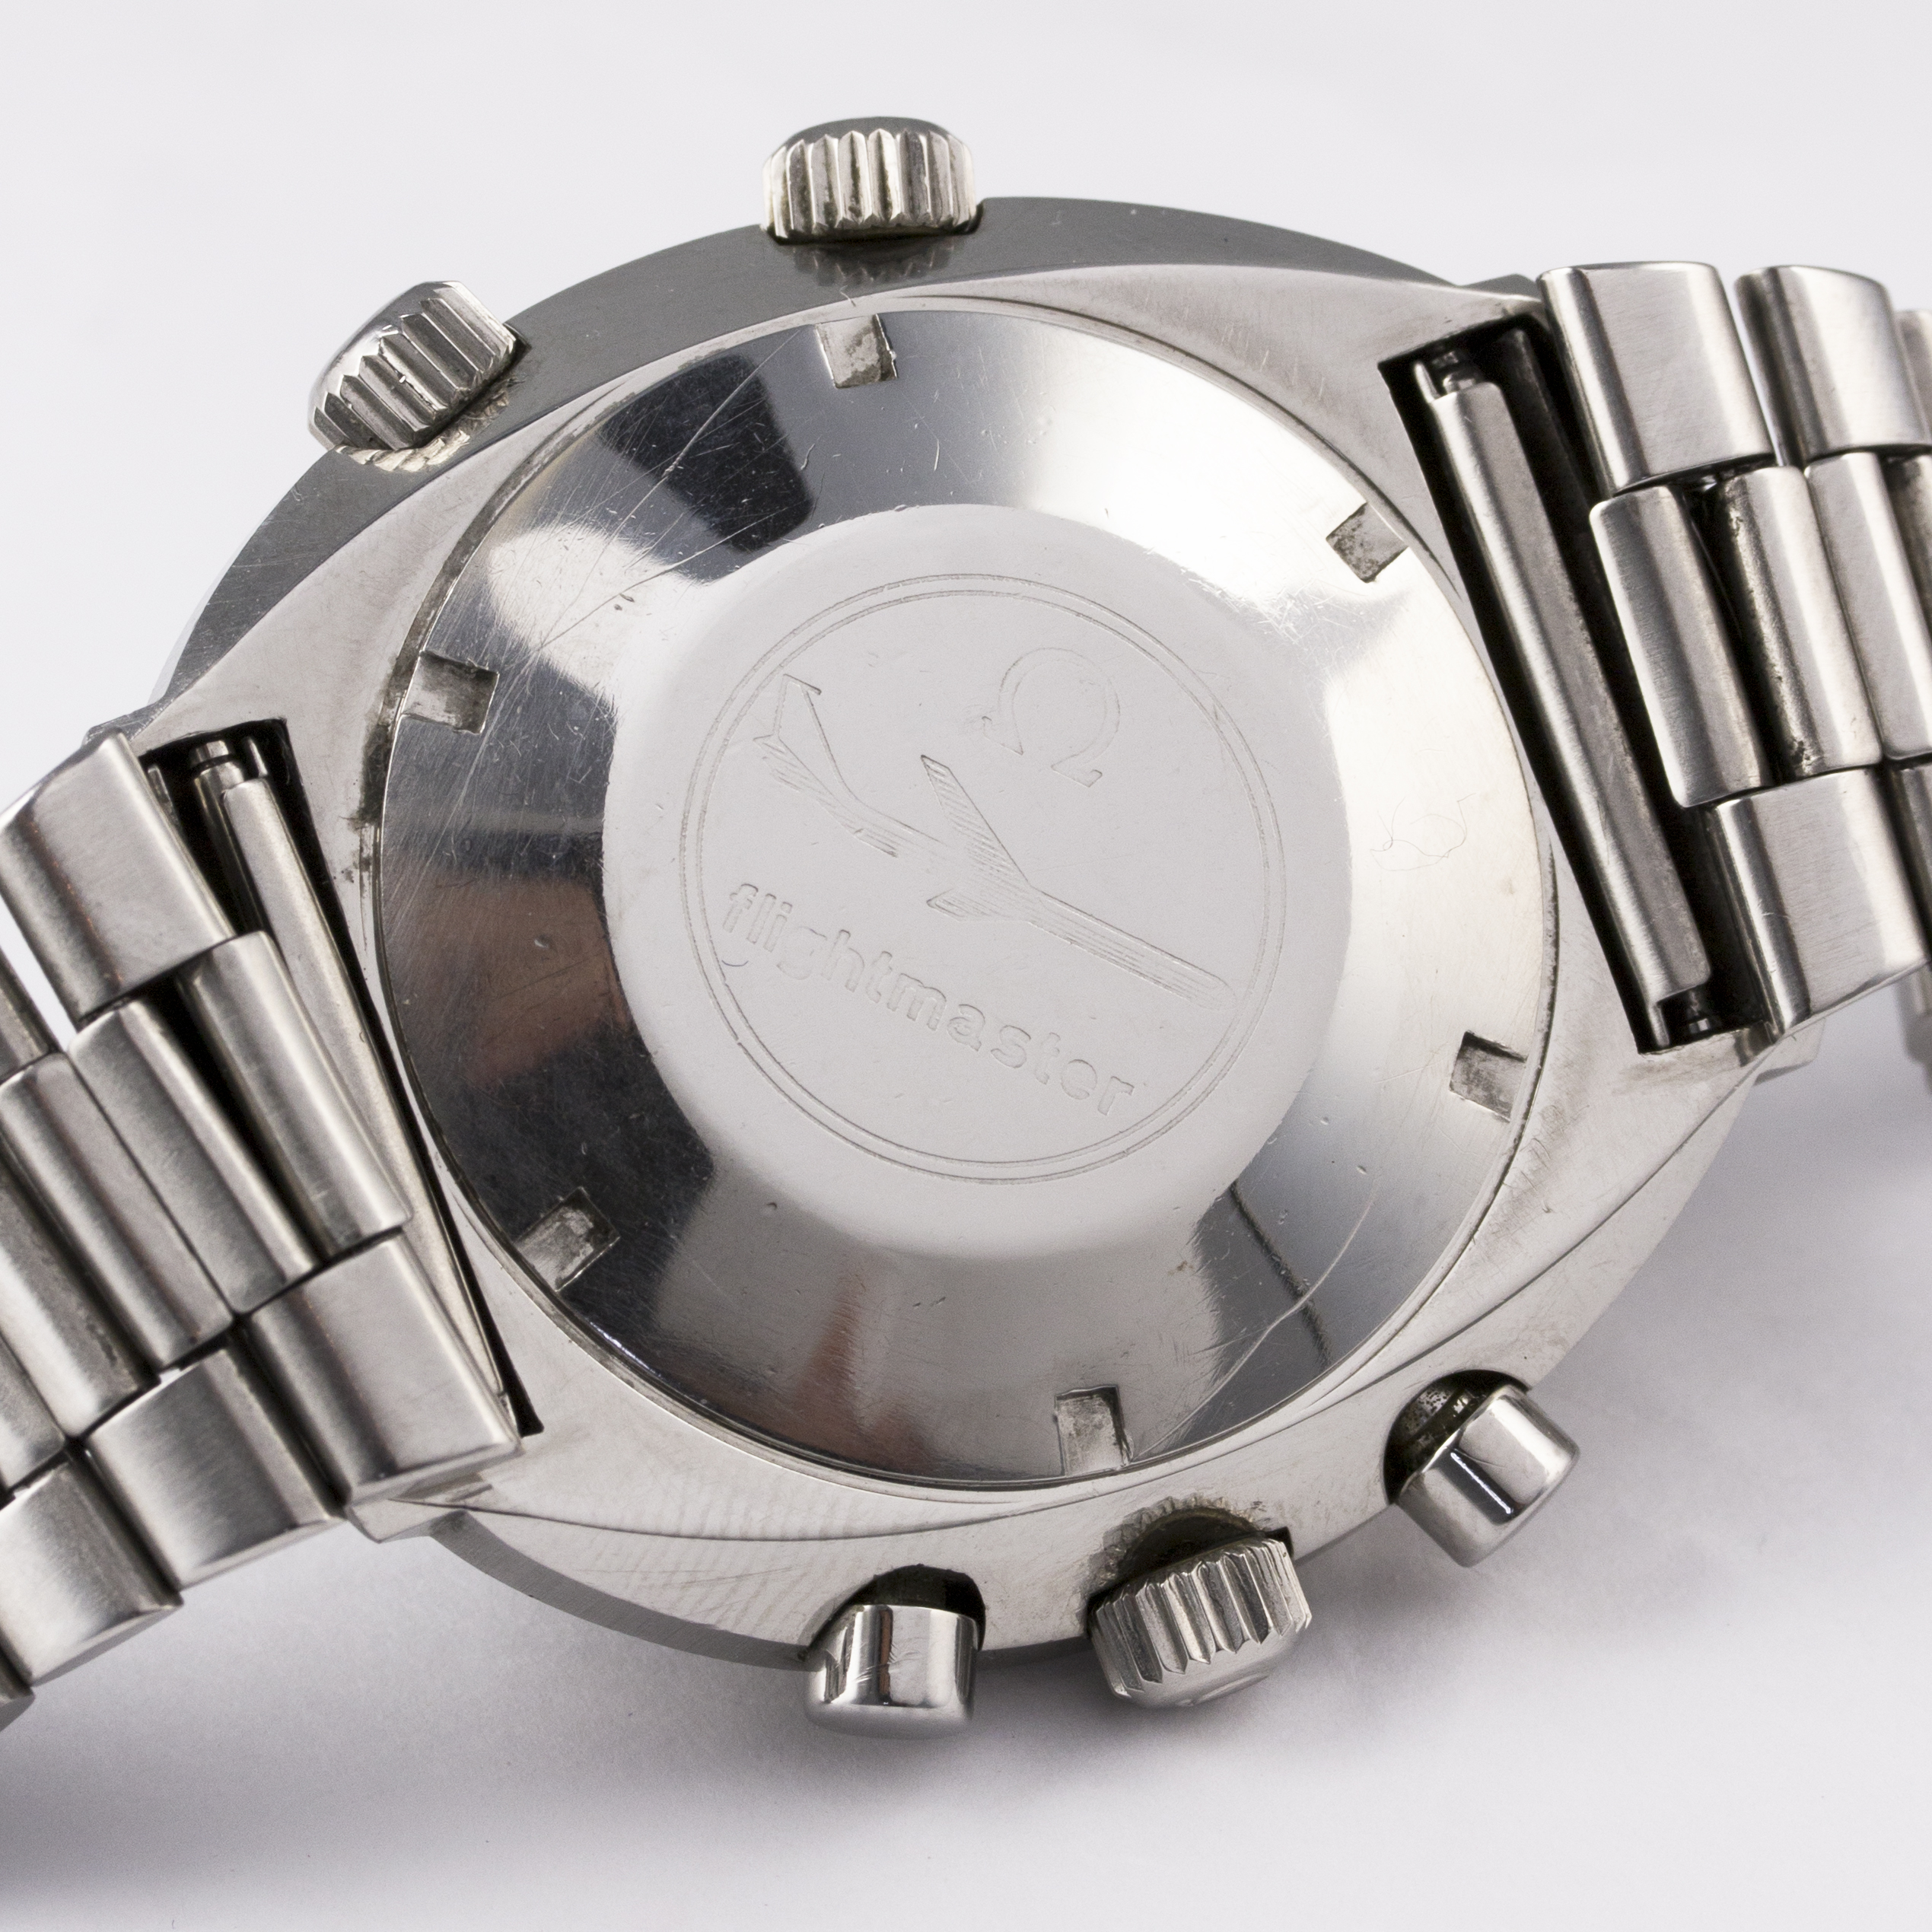 A RARE GENTLEMAN’S STAINLESS STEEL OMEGA FLIGHTMASTER CHRONOGRAPH BRACELET WATCH
CIRCA 1970, REF. 14 - Image 8 of 10